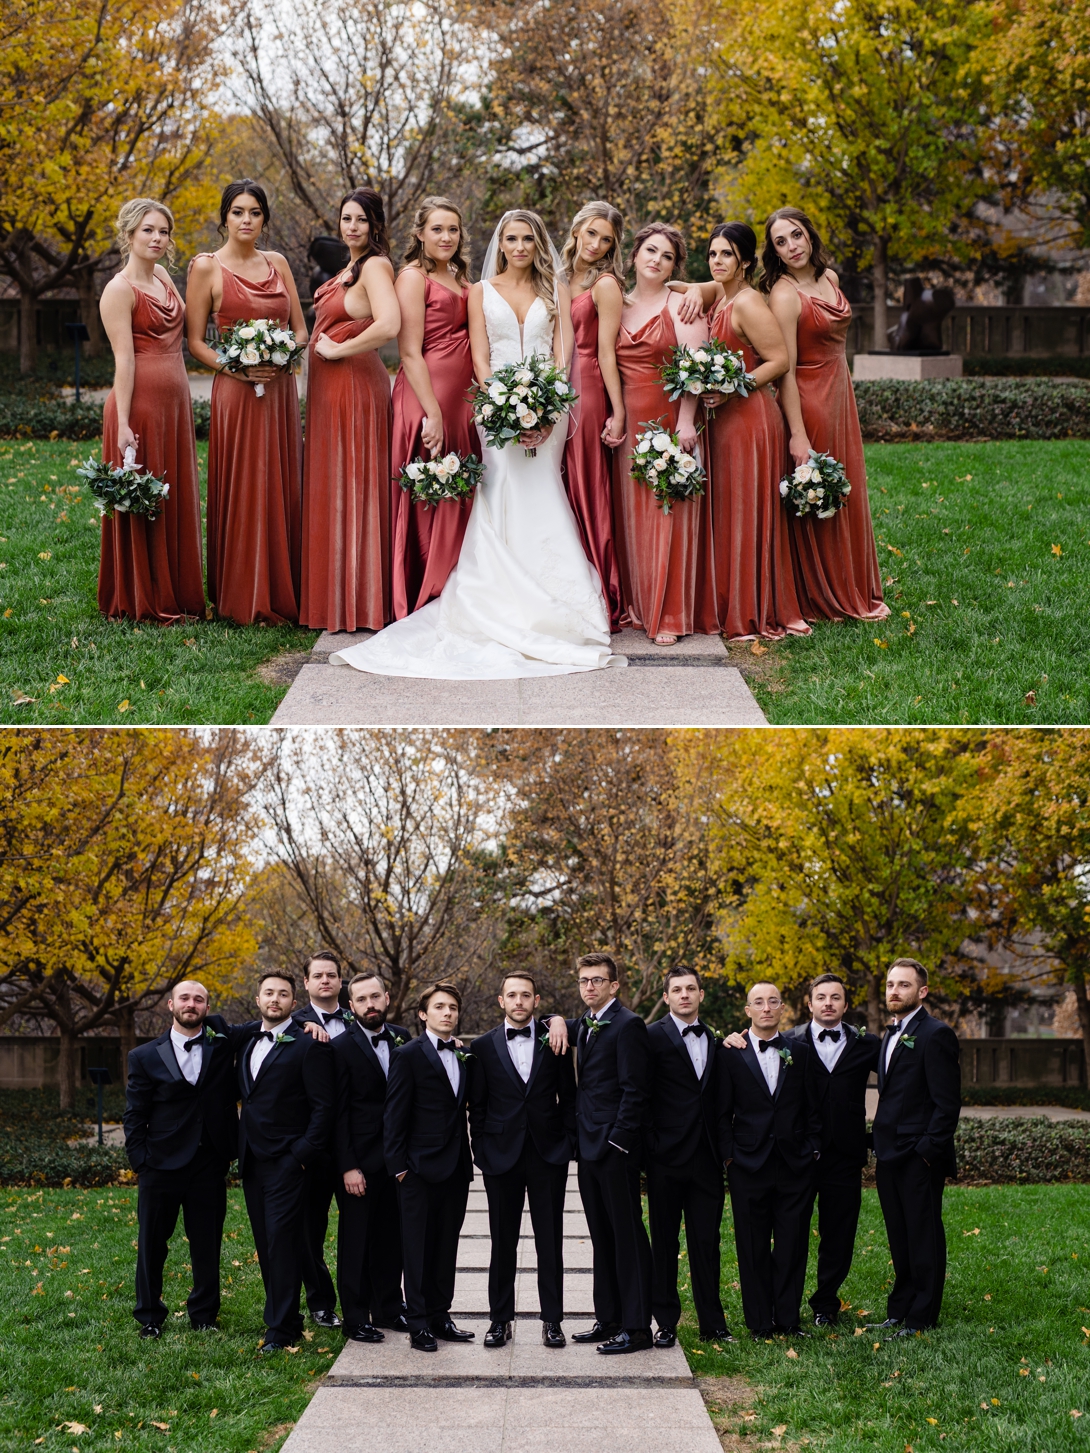 Bridal party photos at the nelson museum